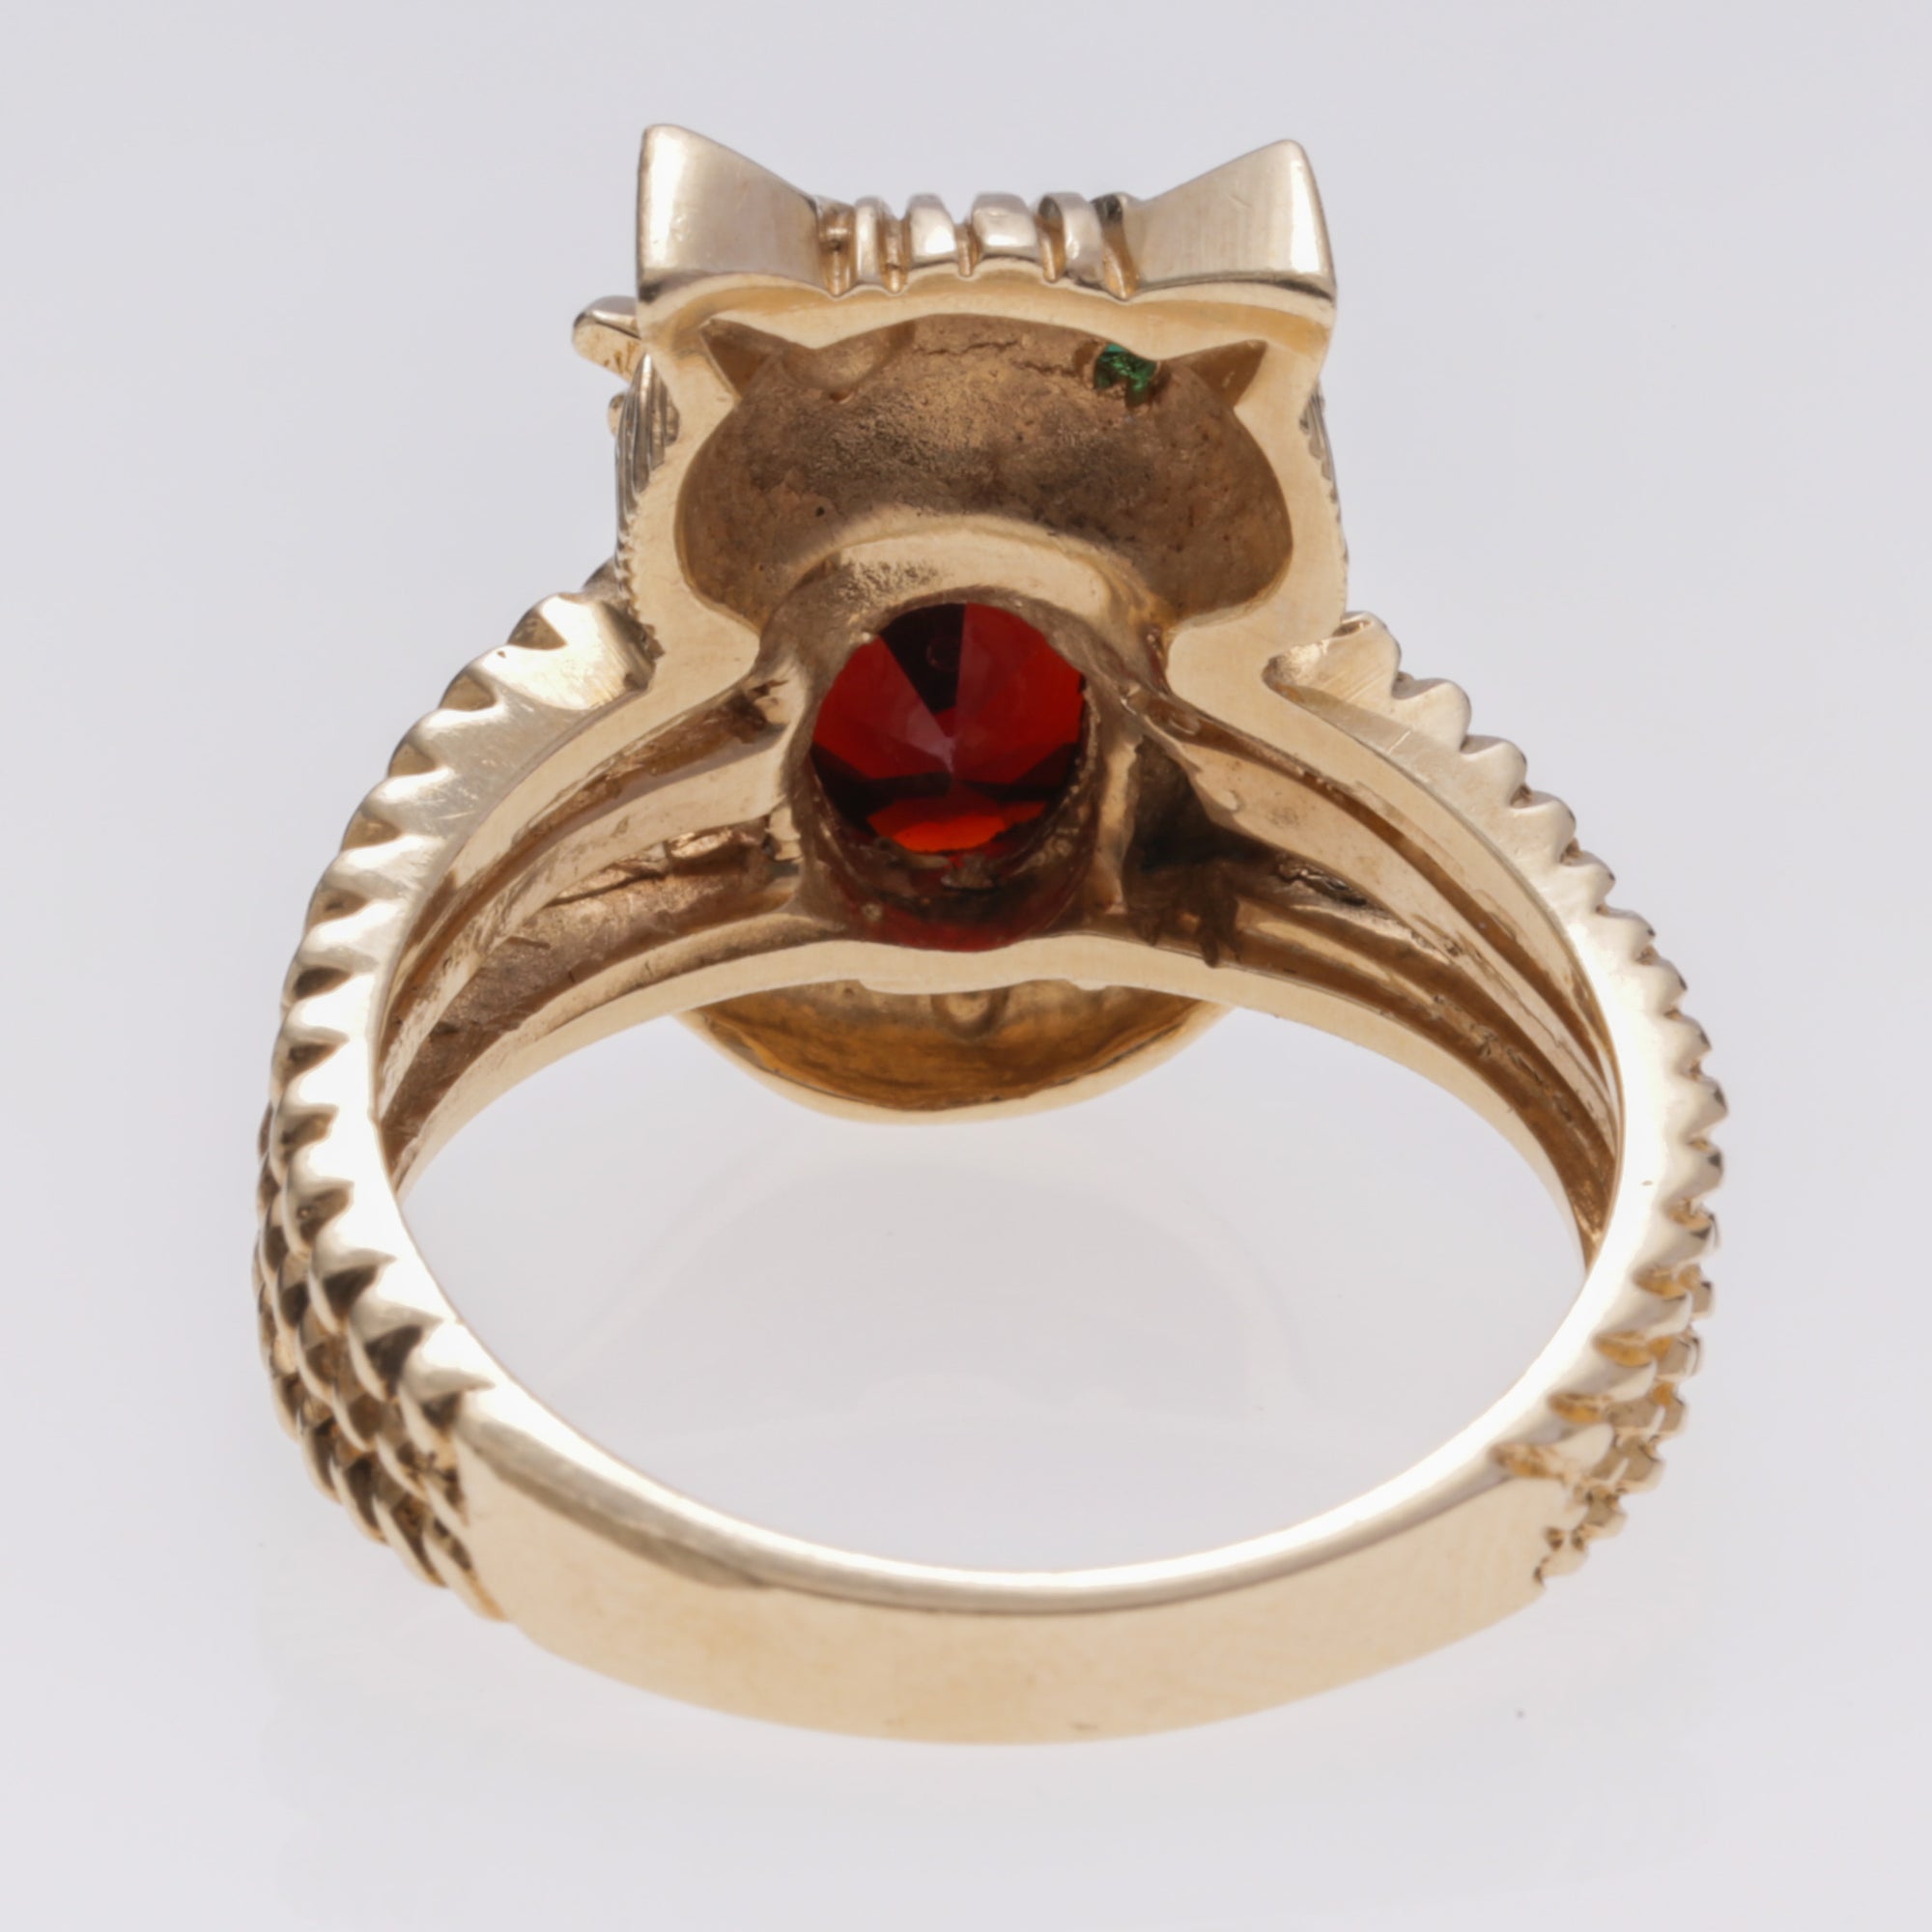 10K Yellow Gold Garnet and Glass Ring | 1.44ct, 0.02ctw | SZ 6.75